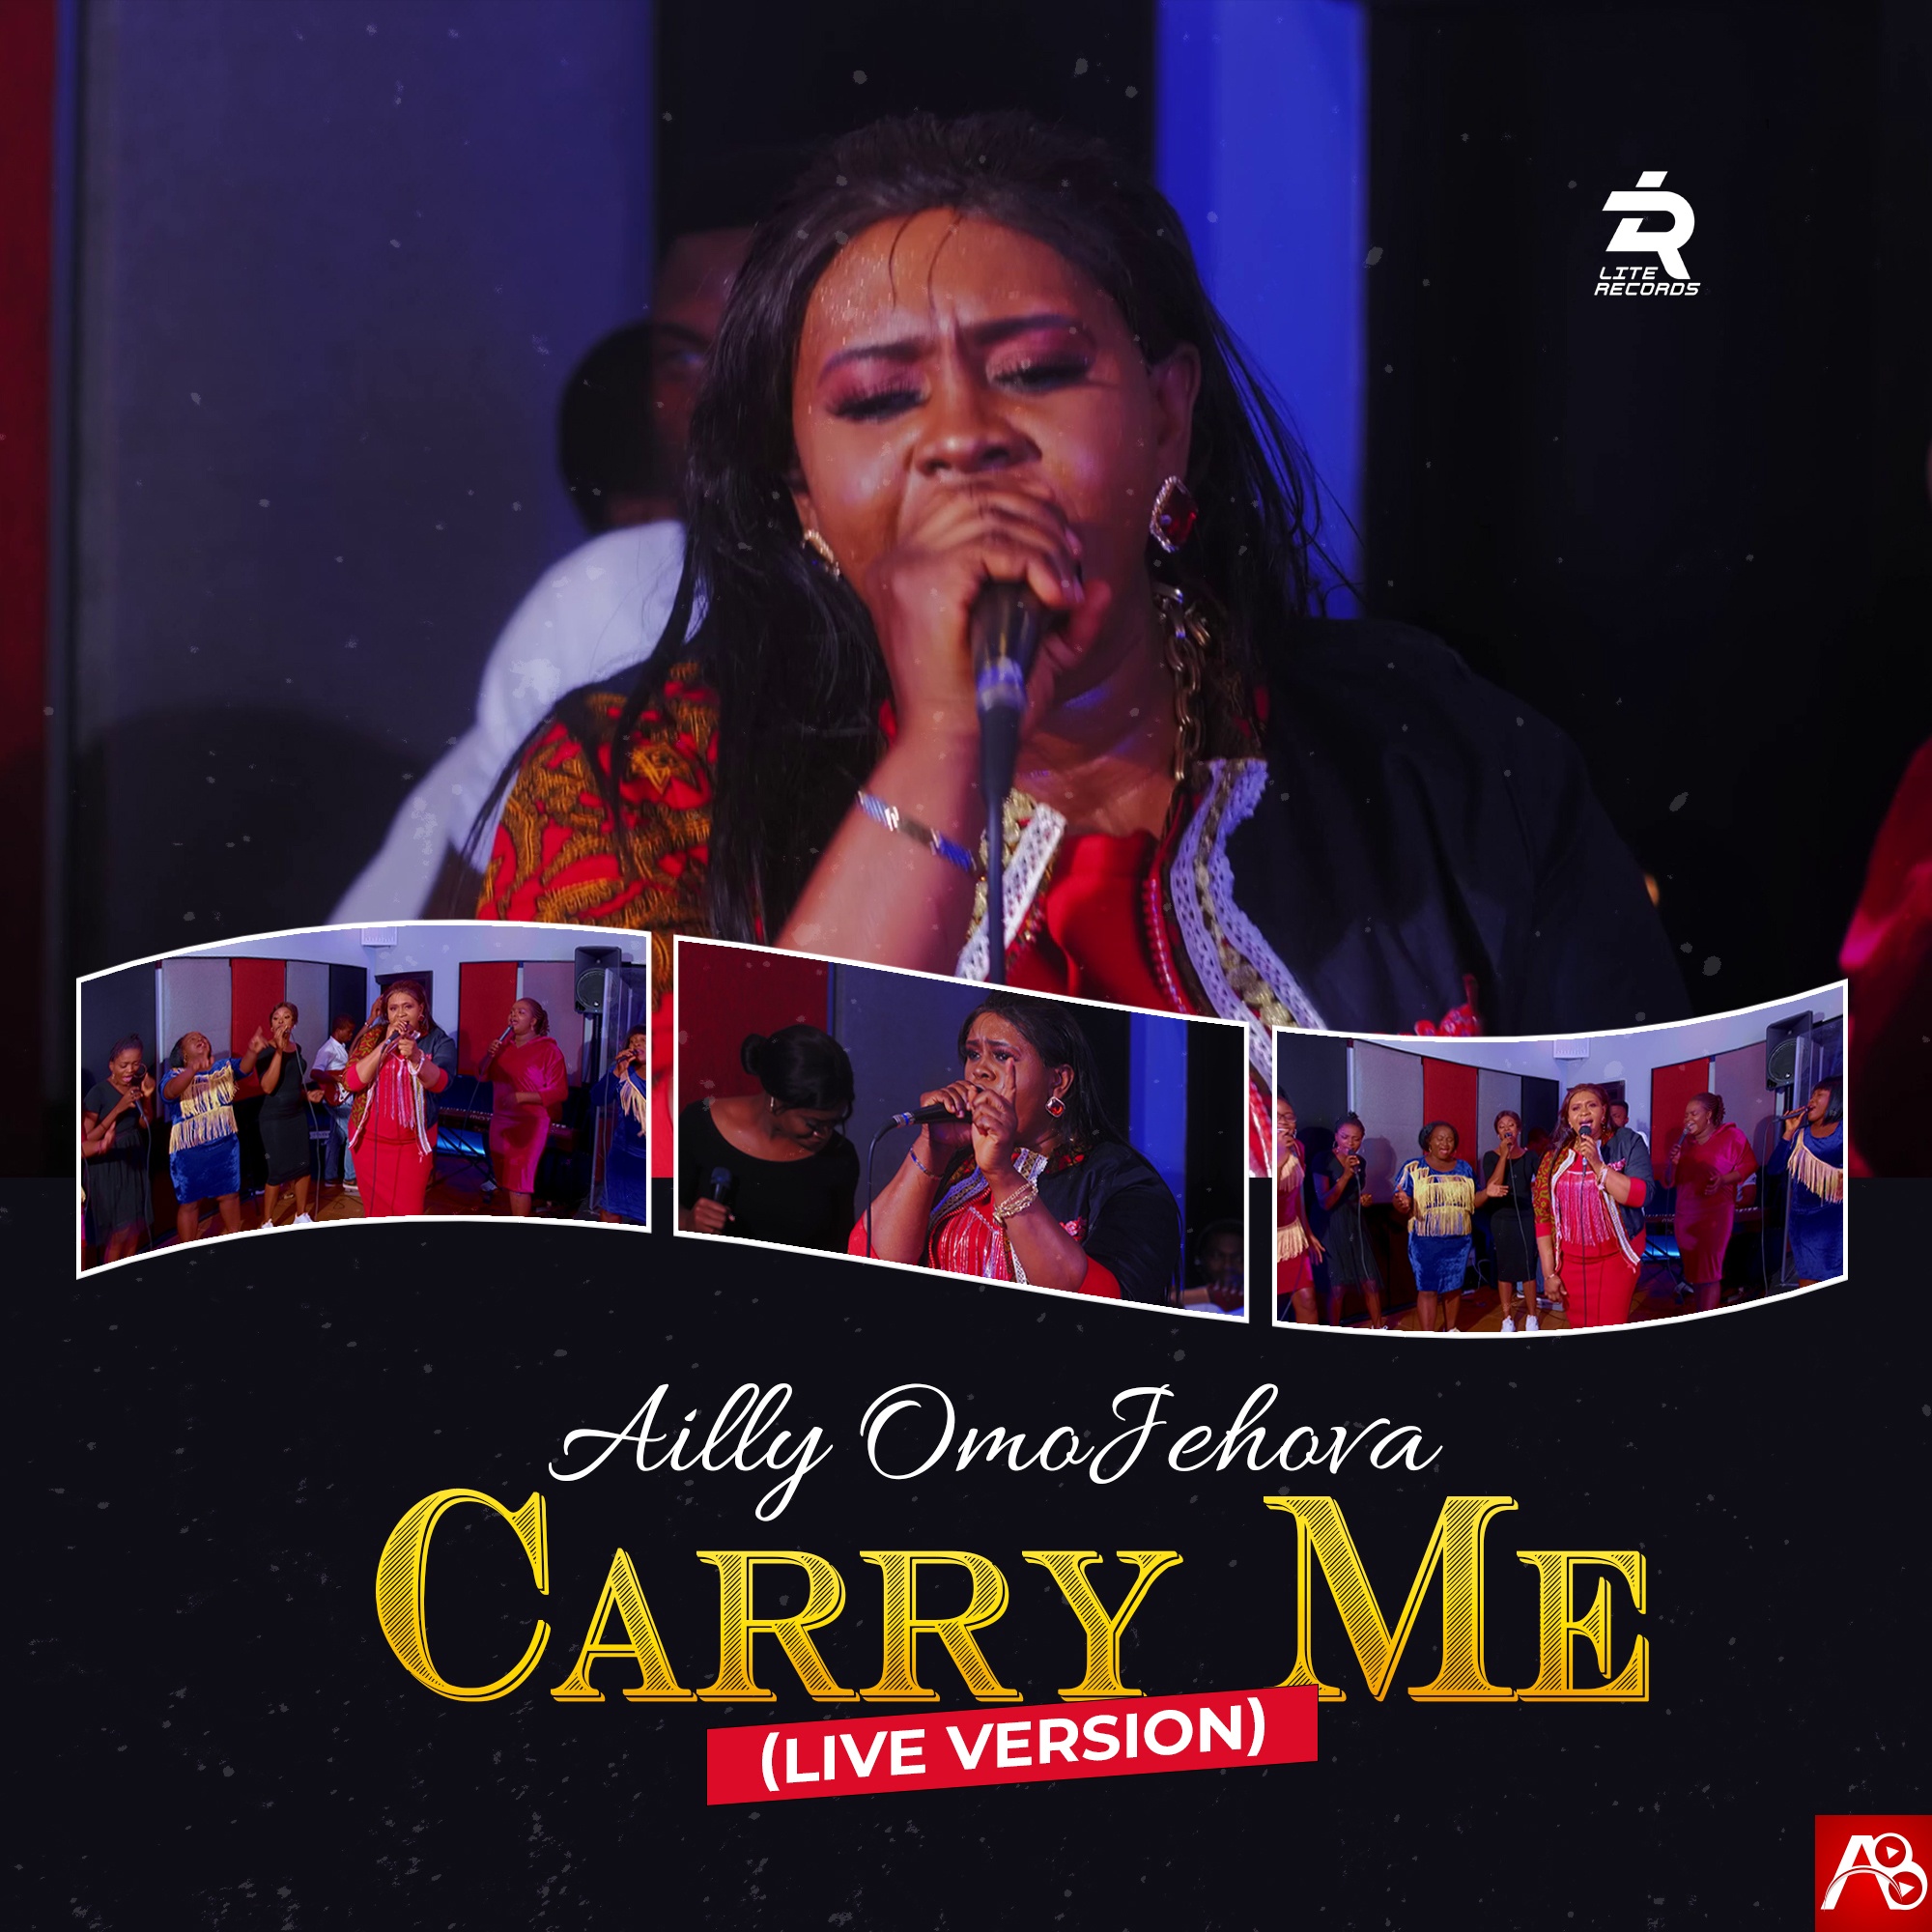 Live Video + MP3: Ailly Omojehova - Carry Me